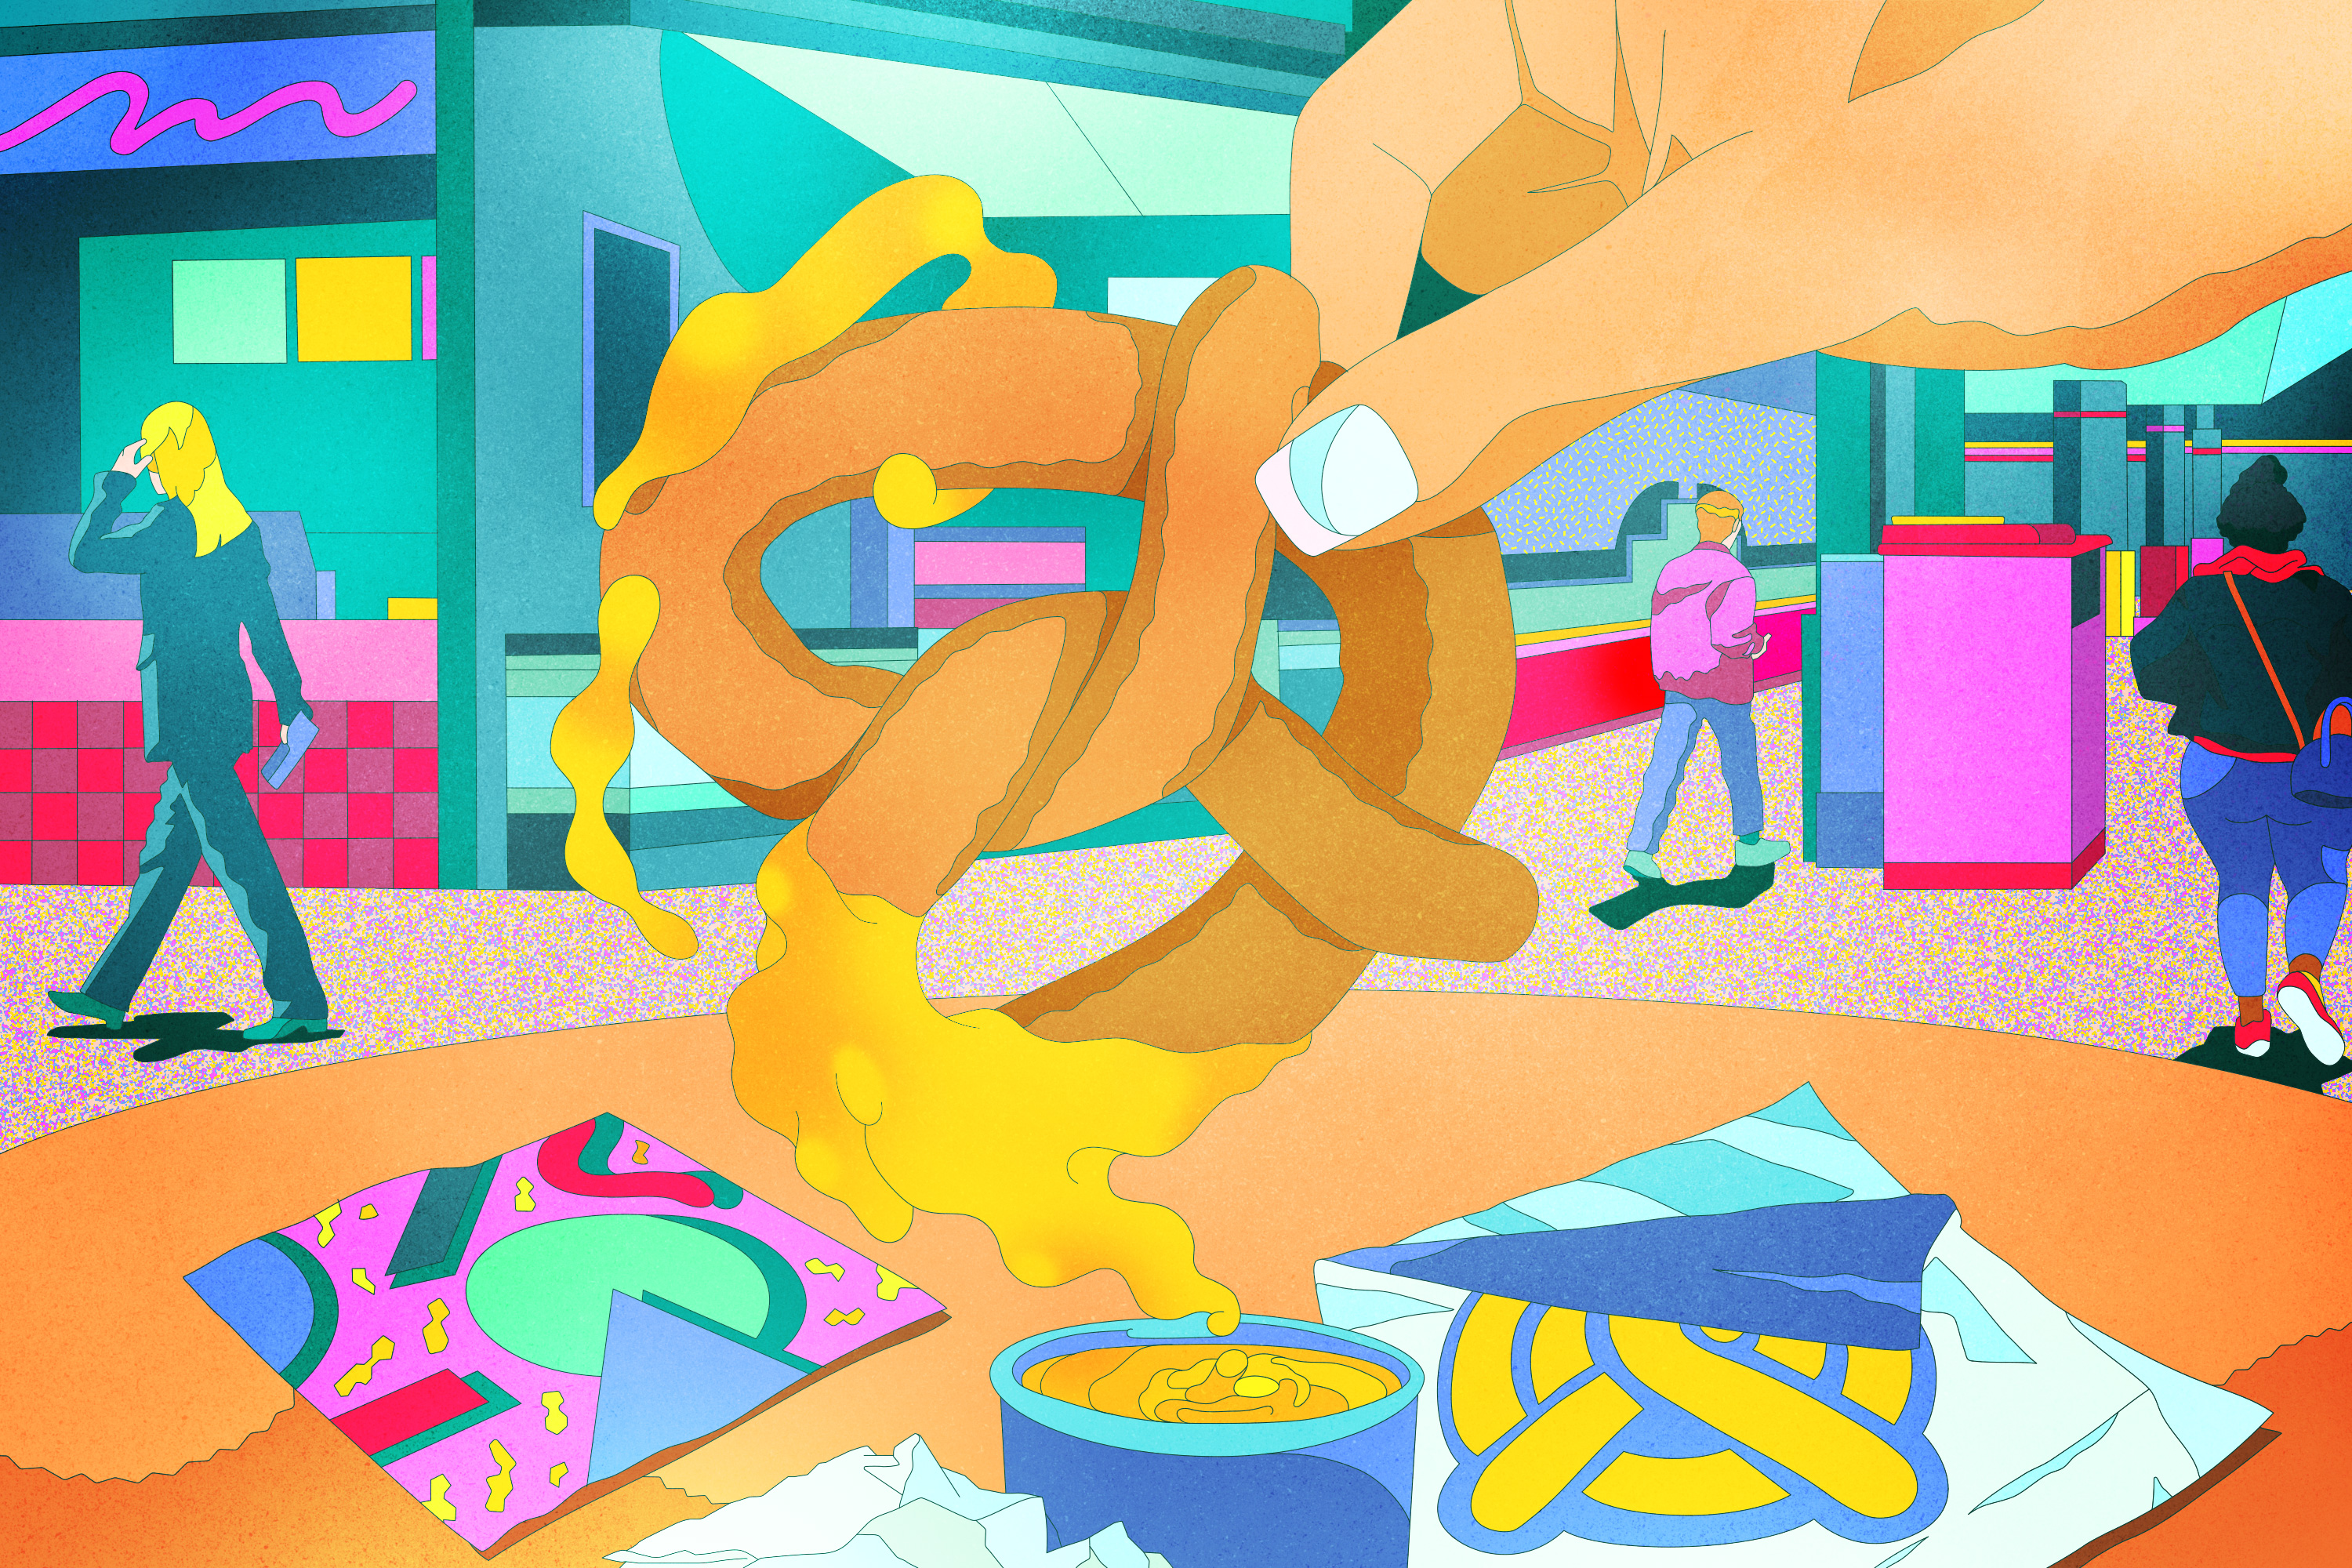 An illustrated large pretzel is being dipped into a cup of yellow cheese, with a mall food court in the background.